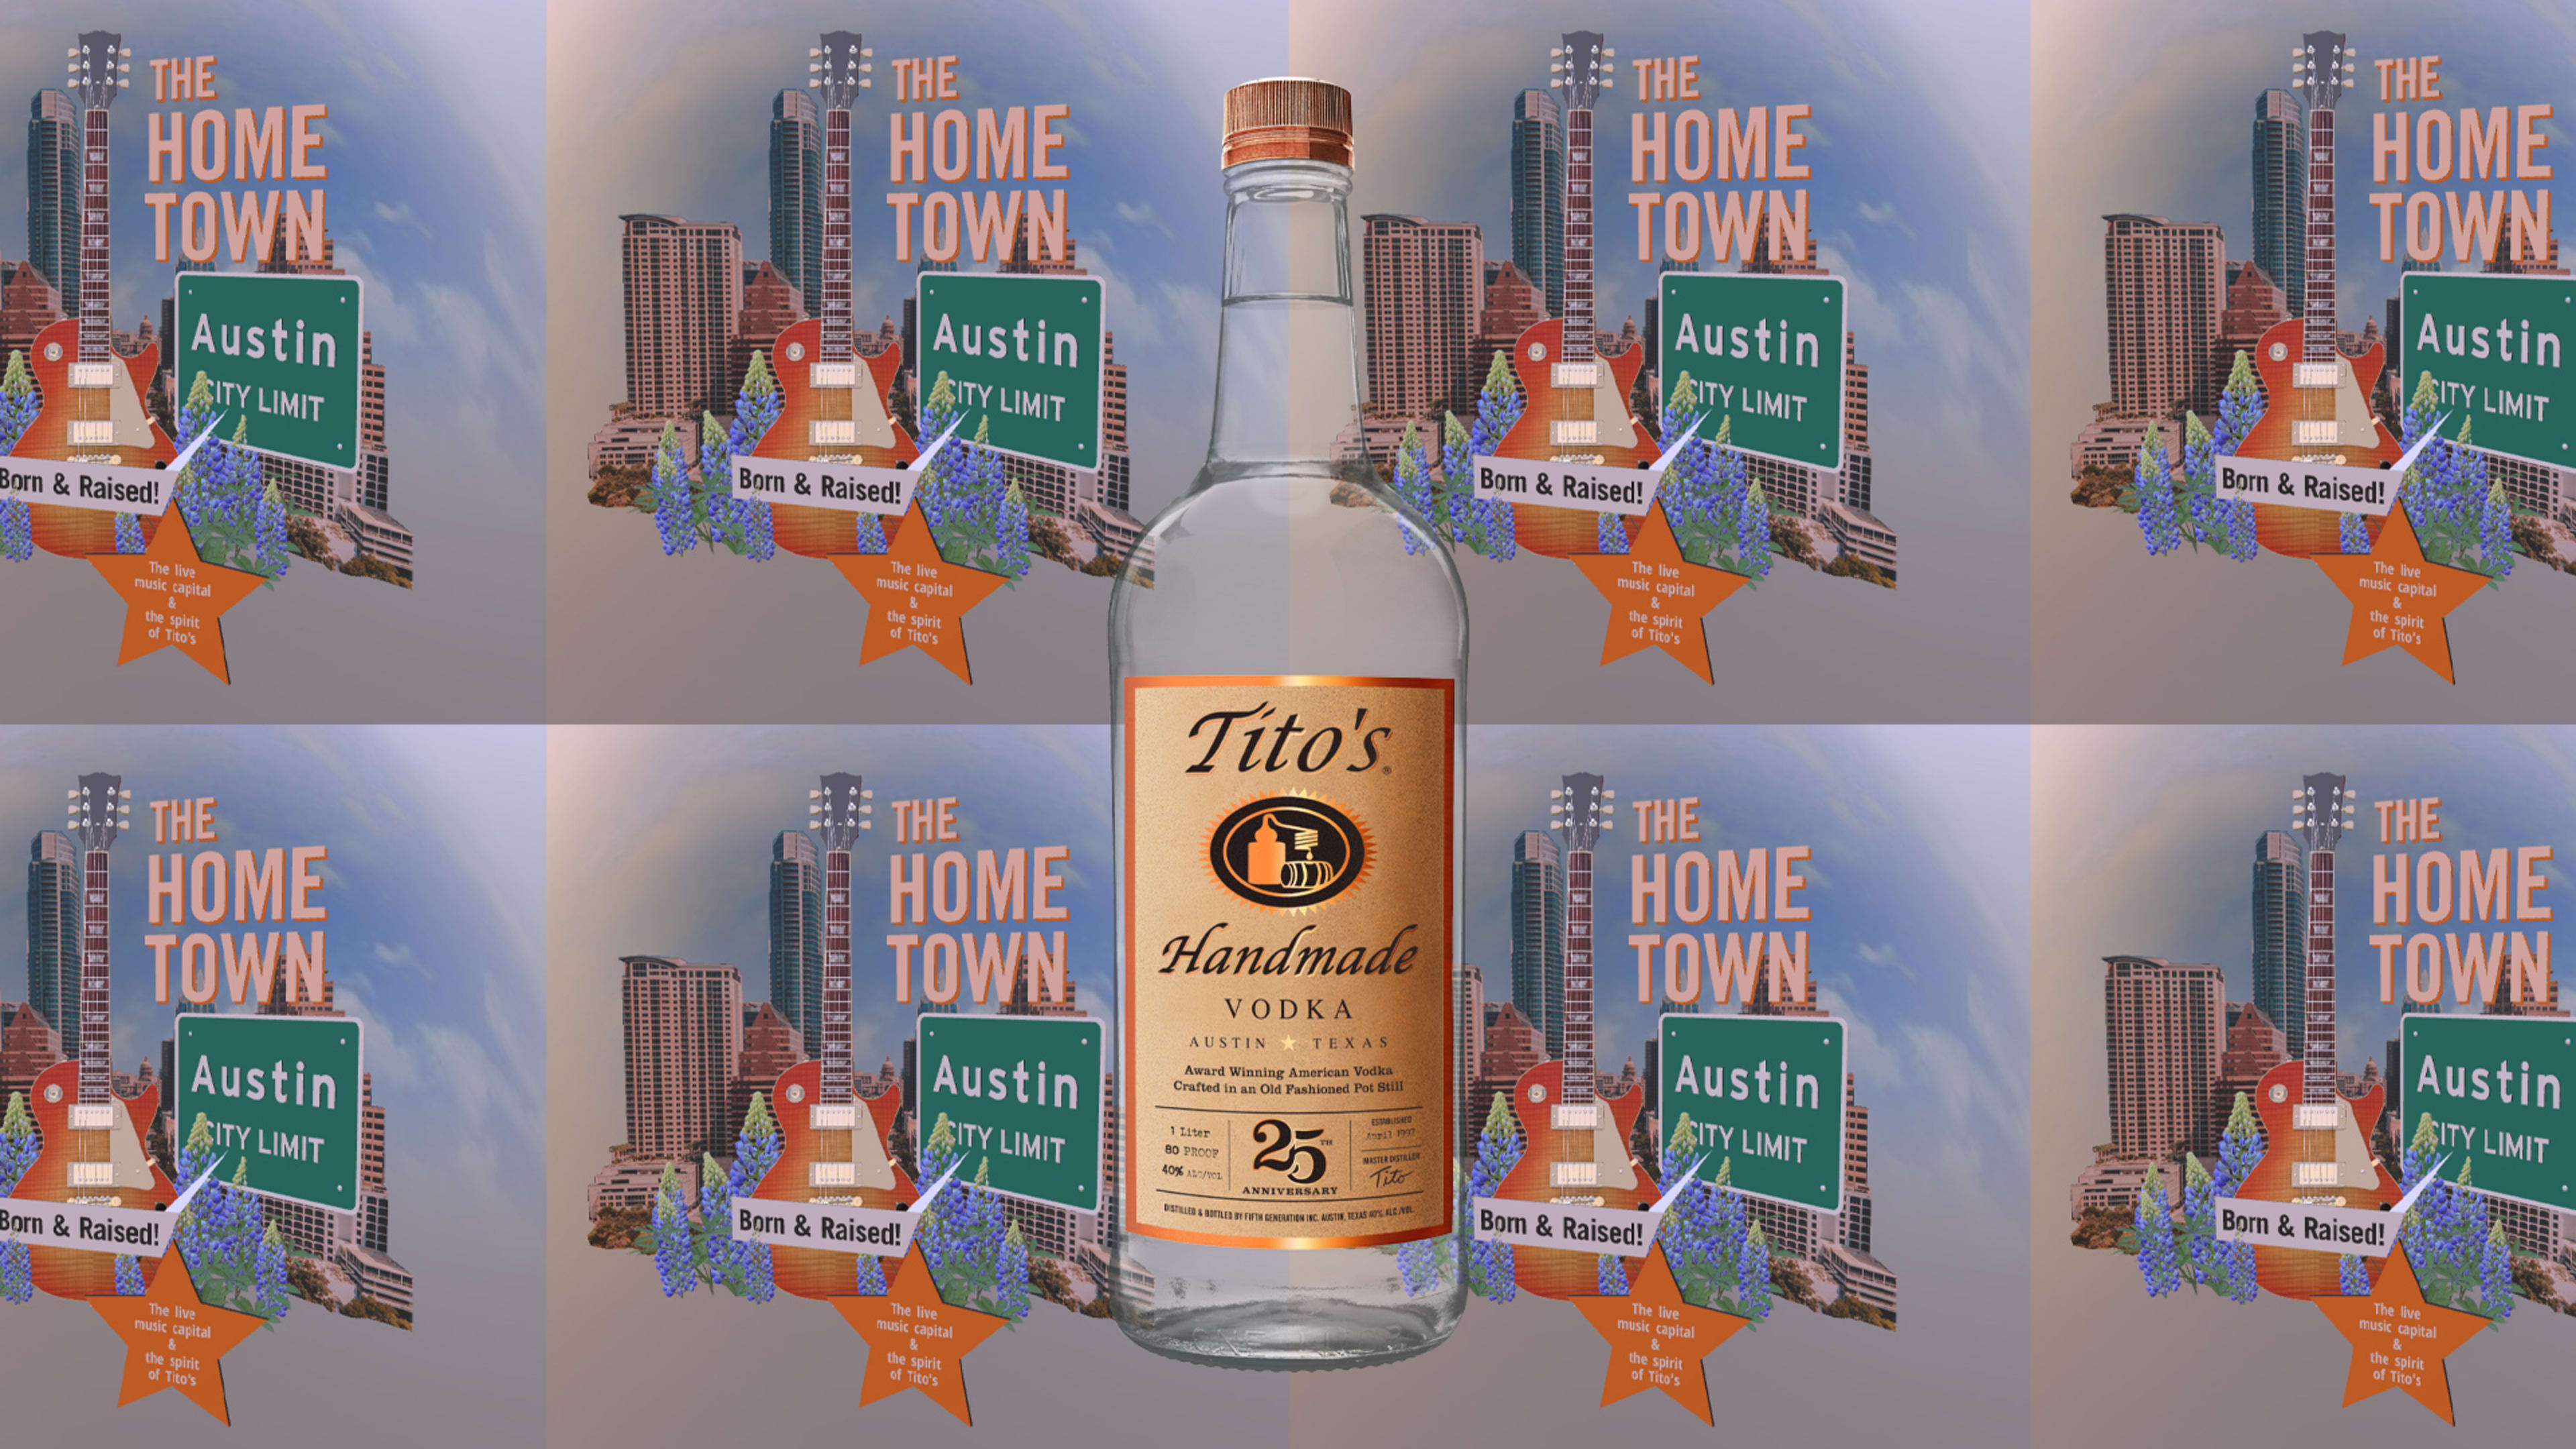 Tito’s vodka blends hi-tech and heritage for its 25th anniversary